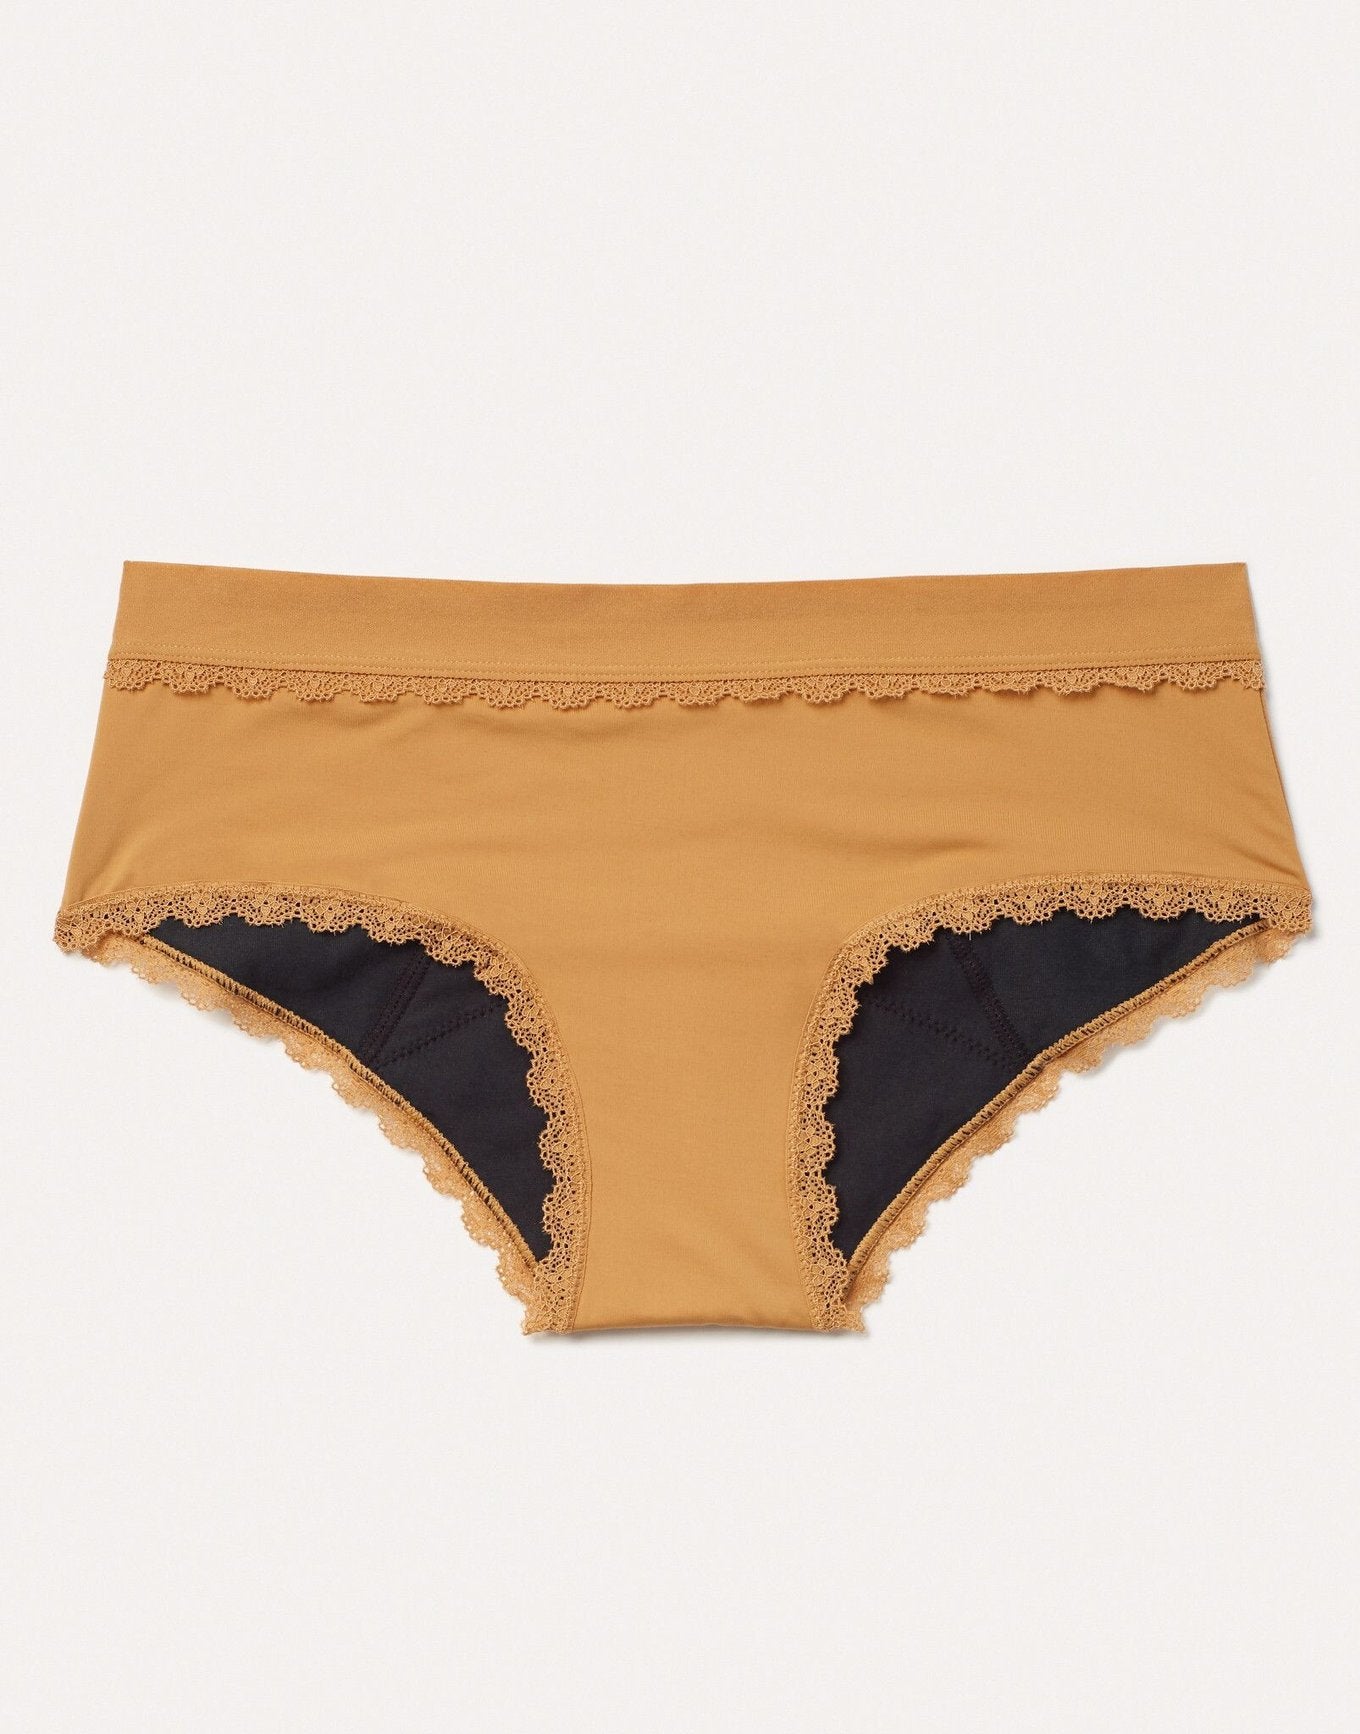 Joyja Olivia period-proof panty in color Sand Dry and shape hipster